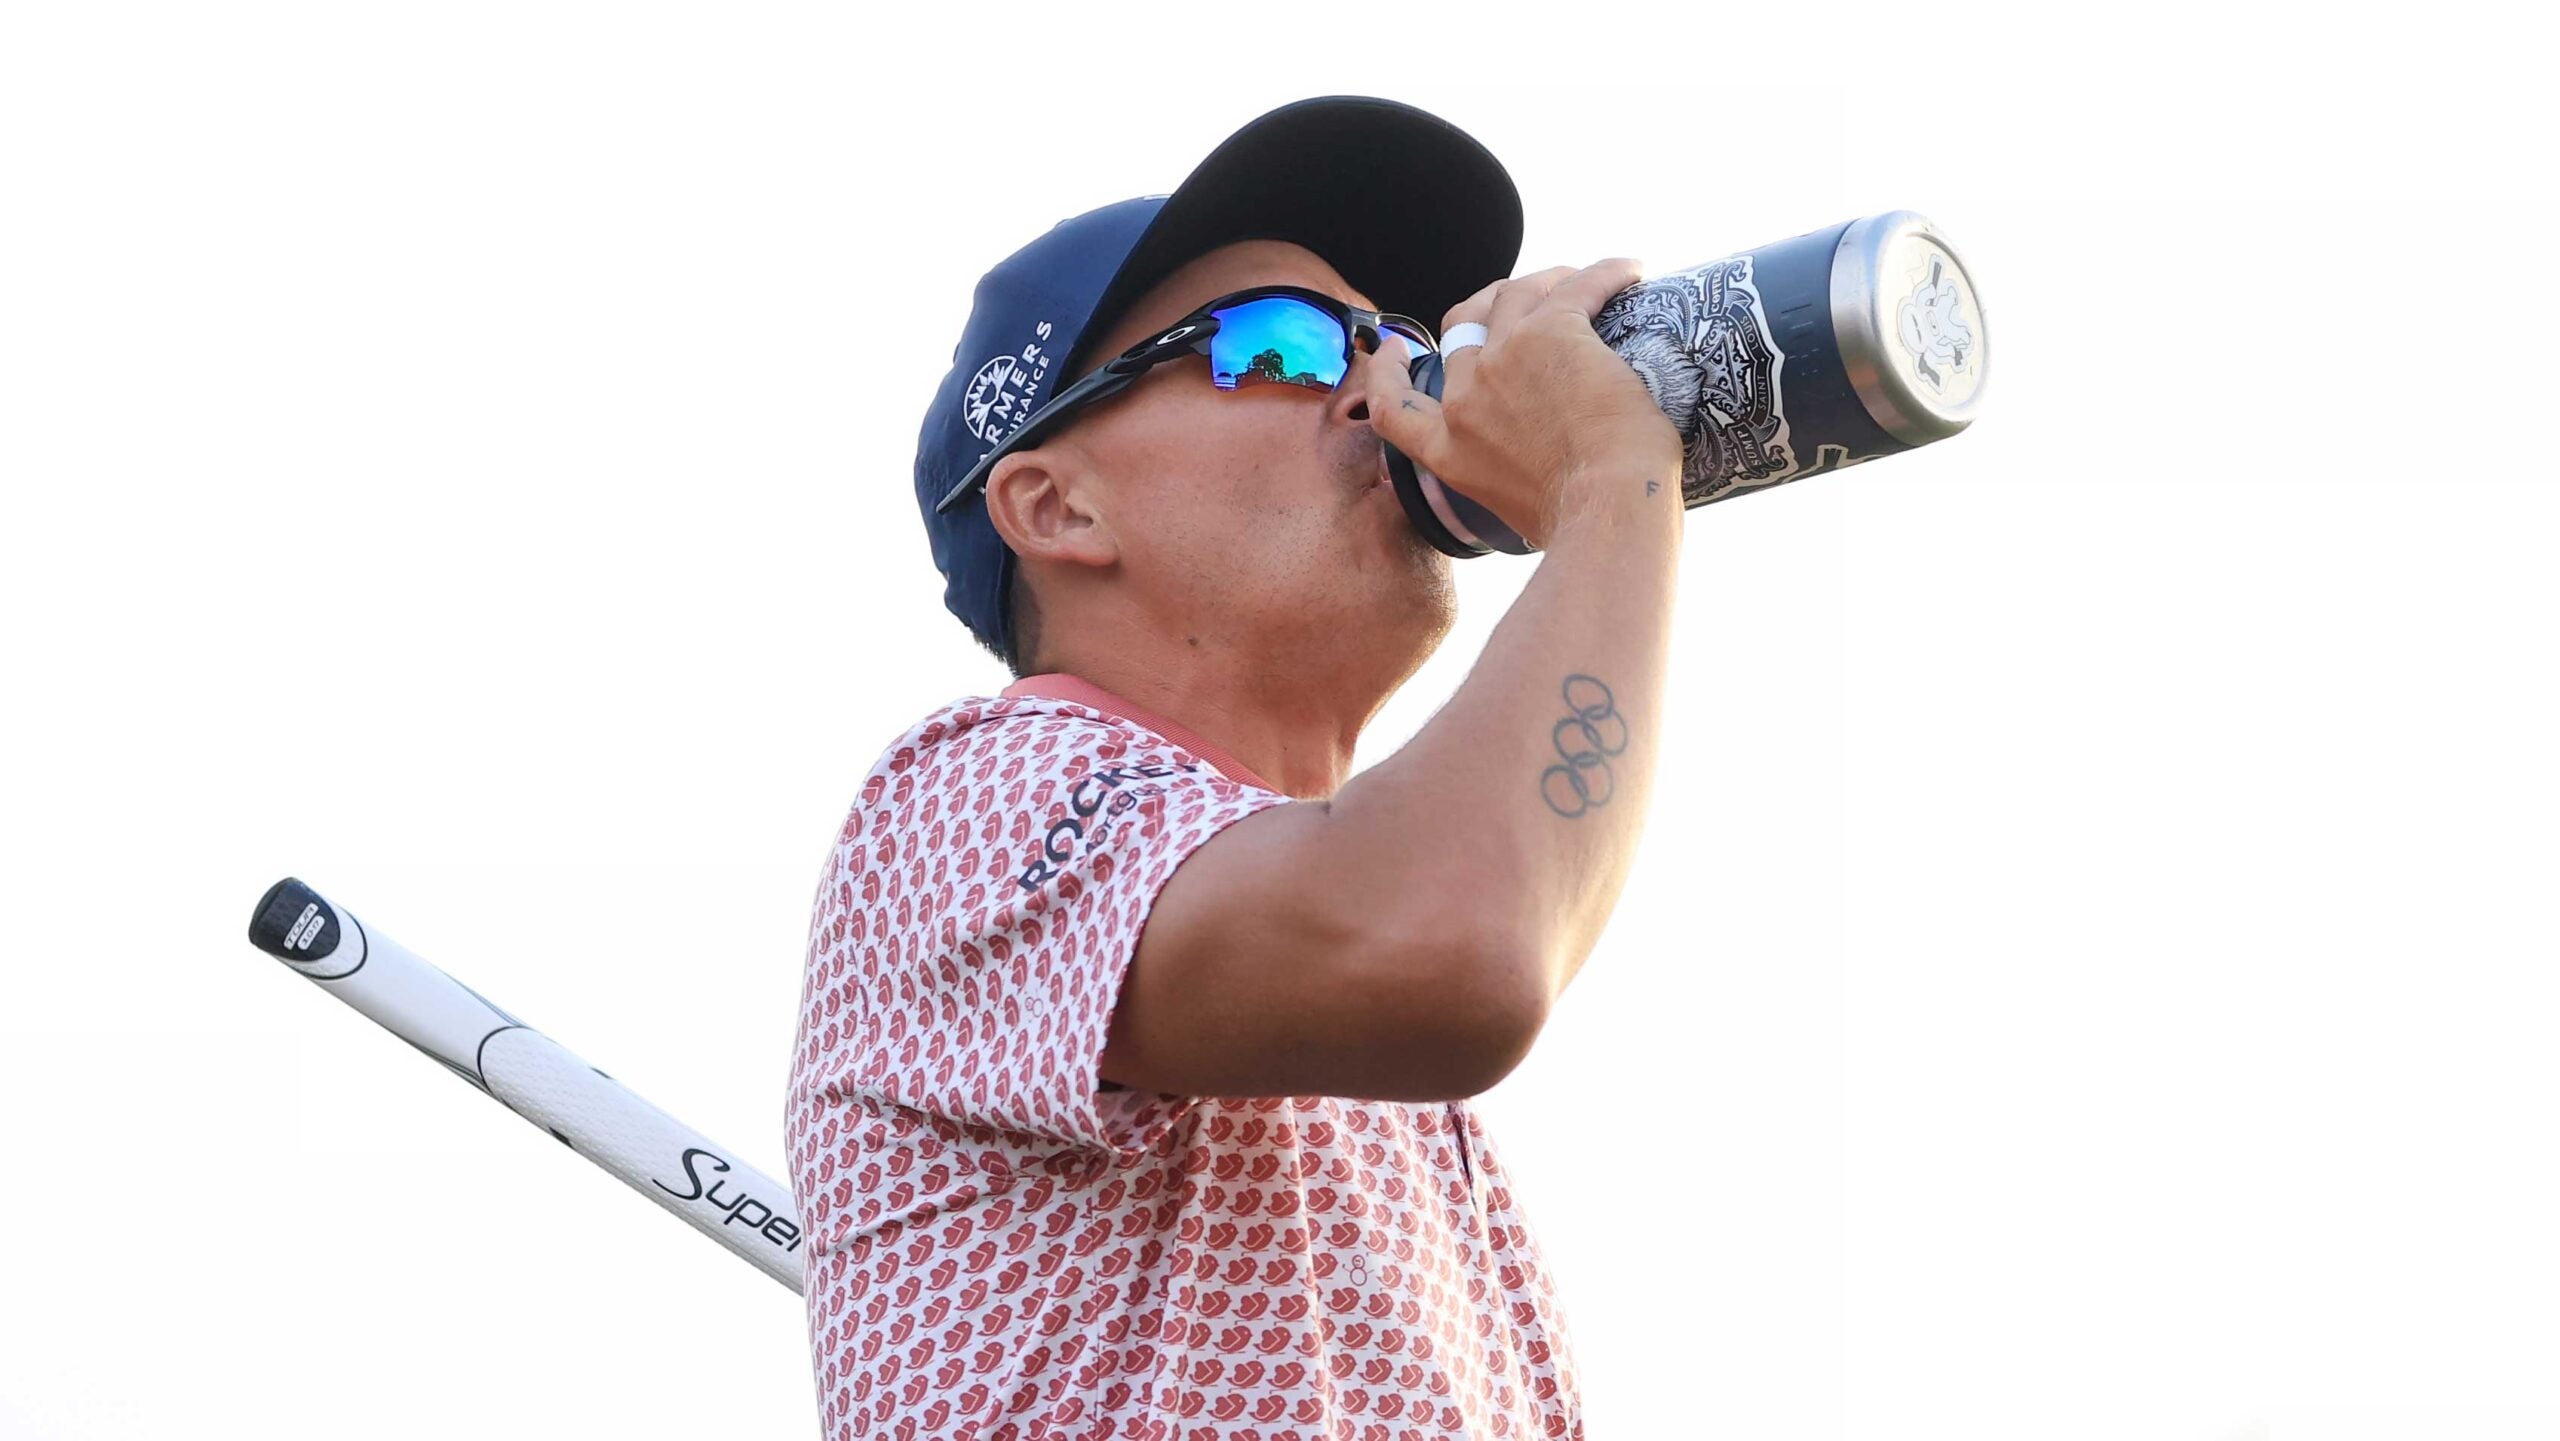 Stickers adorn Rickie Fowler's ever-present water bottle at US Open